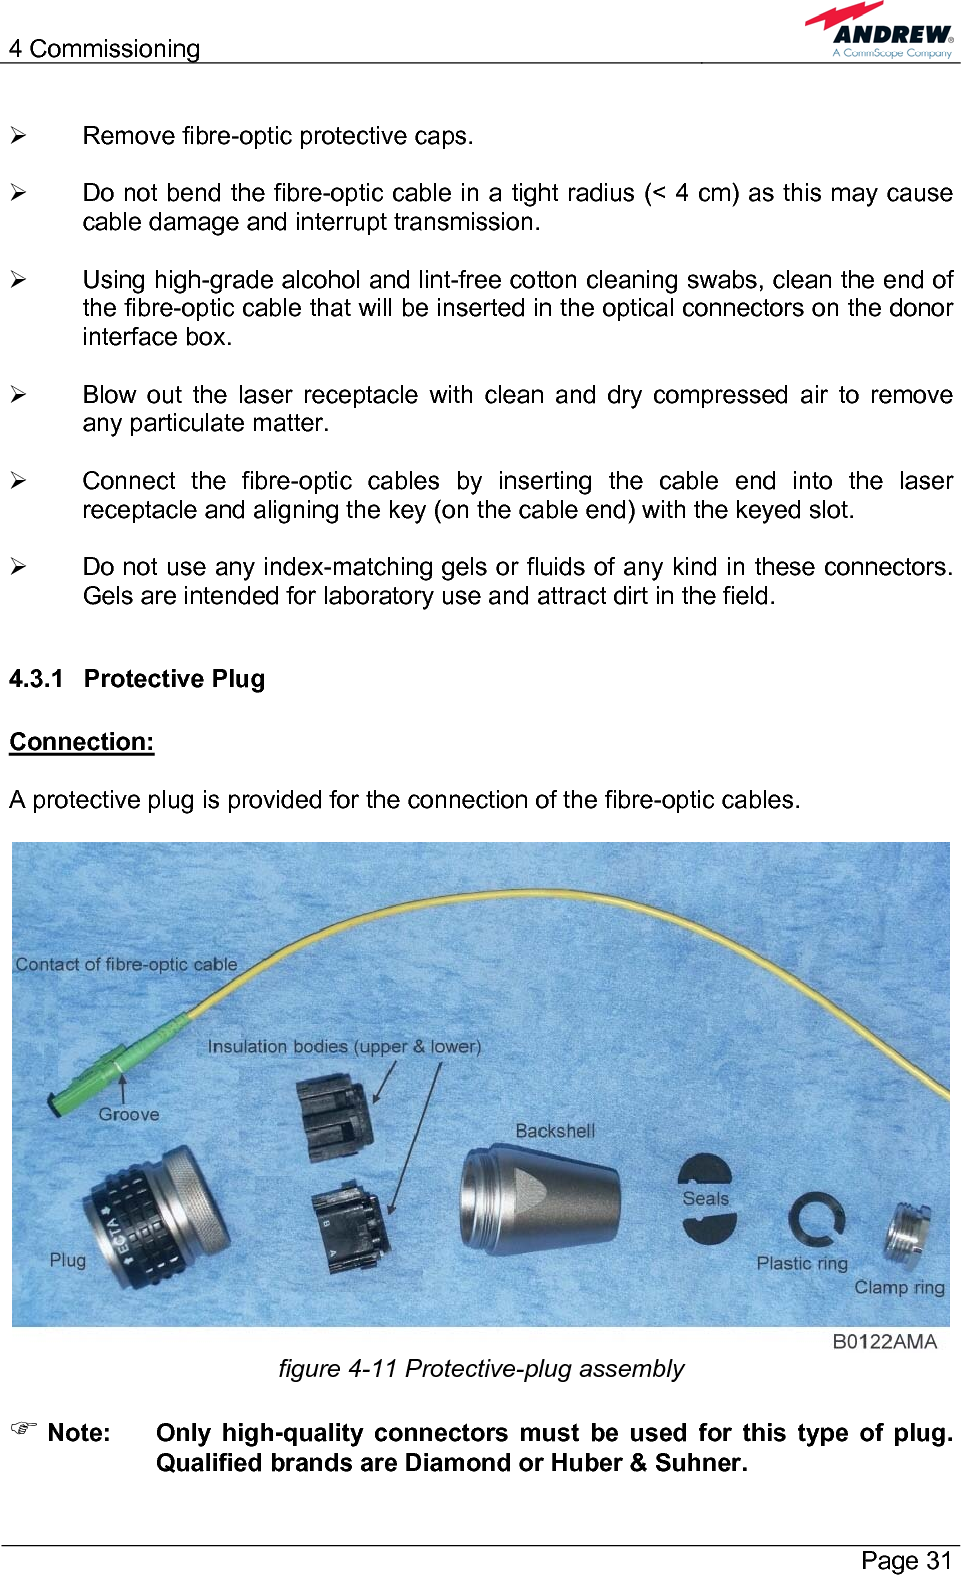 4 Commissioning       Page 31  ¾  Remove fibre-optic protective caps.  ¾  Do not bend the fibre-optic cable in a tight radius (&lt; 4 cm) as this may cause cable damage and interrupt transmission.  ¾  Using high-grade alcohol and lint-free cotton cleaning swabs, clean the end of the fibre-optic cable that will be inserted in the optical connectors on the donor interface box.  ¾  Blow out the laser receptacle with clean and dry compressed air to remove any particulate matter.  ¾  Connect the fibre-optic cables by inserting the cable end into the laser receptacle and aligning the key (on the cable end) with the keyed slot.  ¾  Do not use any index-matching gels or fluids of any kind in these connectors. Gels are intended for laboratory use and attract dirt in the field.  4.3.1 Protective Plug  Connection:  A protective plug is provided for the connection of the fibre-optic cables.   figure 4-11 Protective-plug assembly  ) Note:  Only high-quality connectors must be used for this type of plug. Qualified brands are Diamond or Huber &amp; Suhner. 